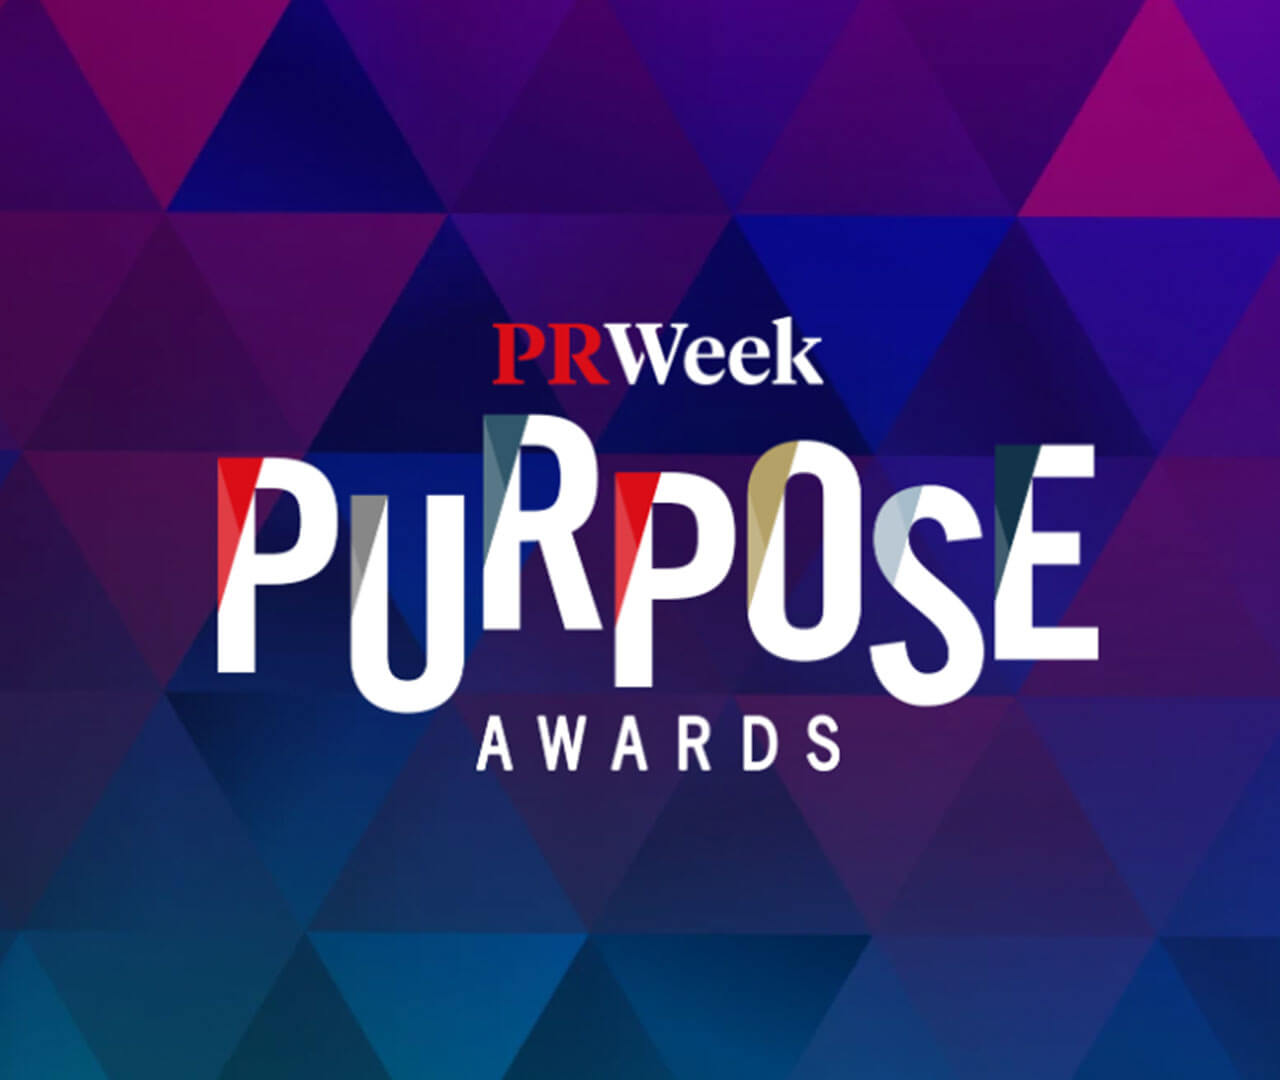 Coyne Public Relations and Owens Corning Named a Finalist in the PRWeek Purpose Awards